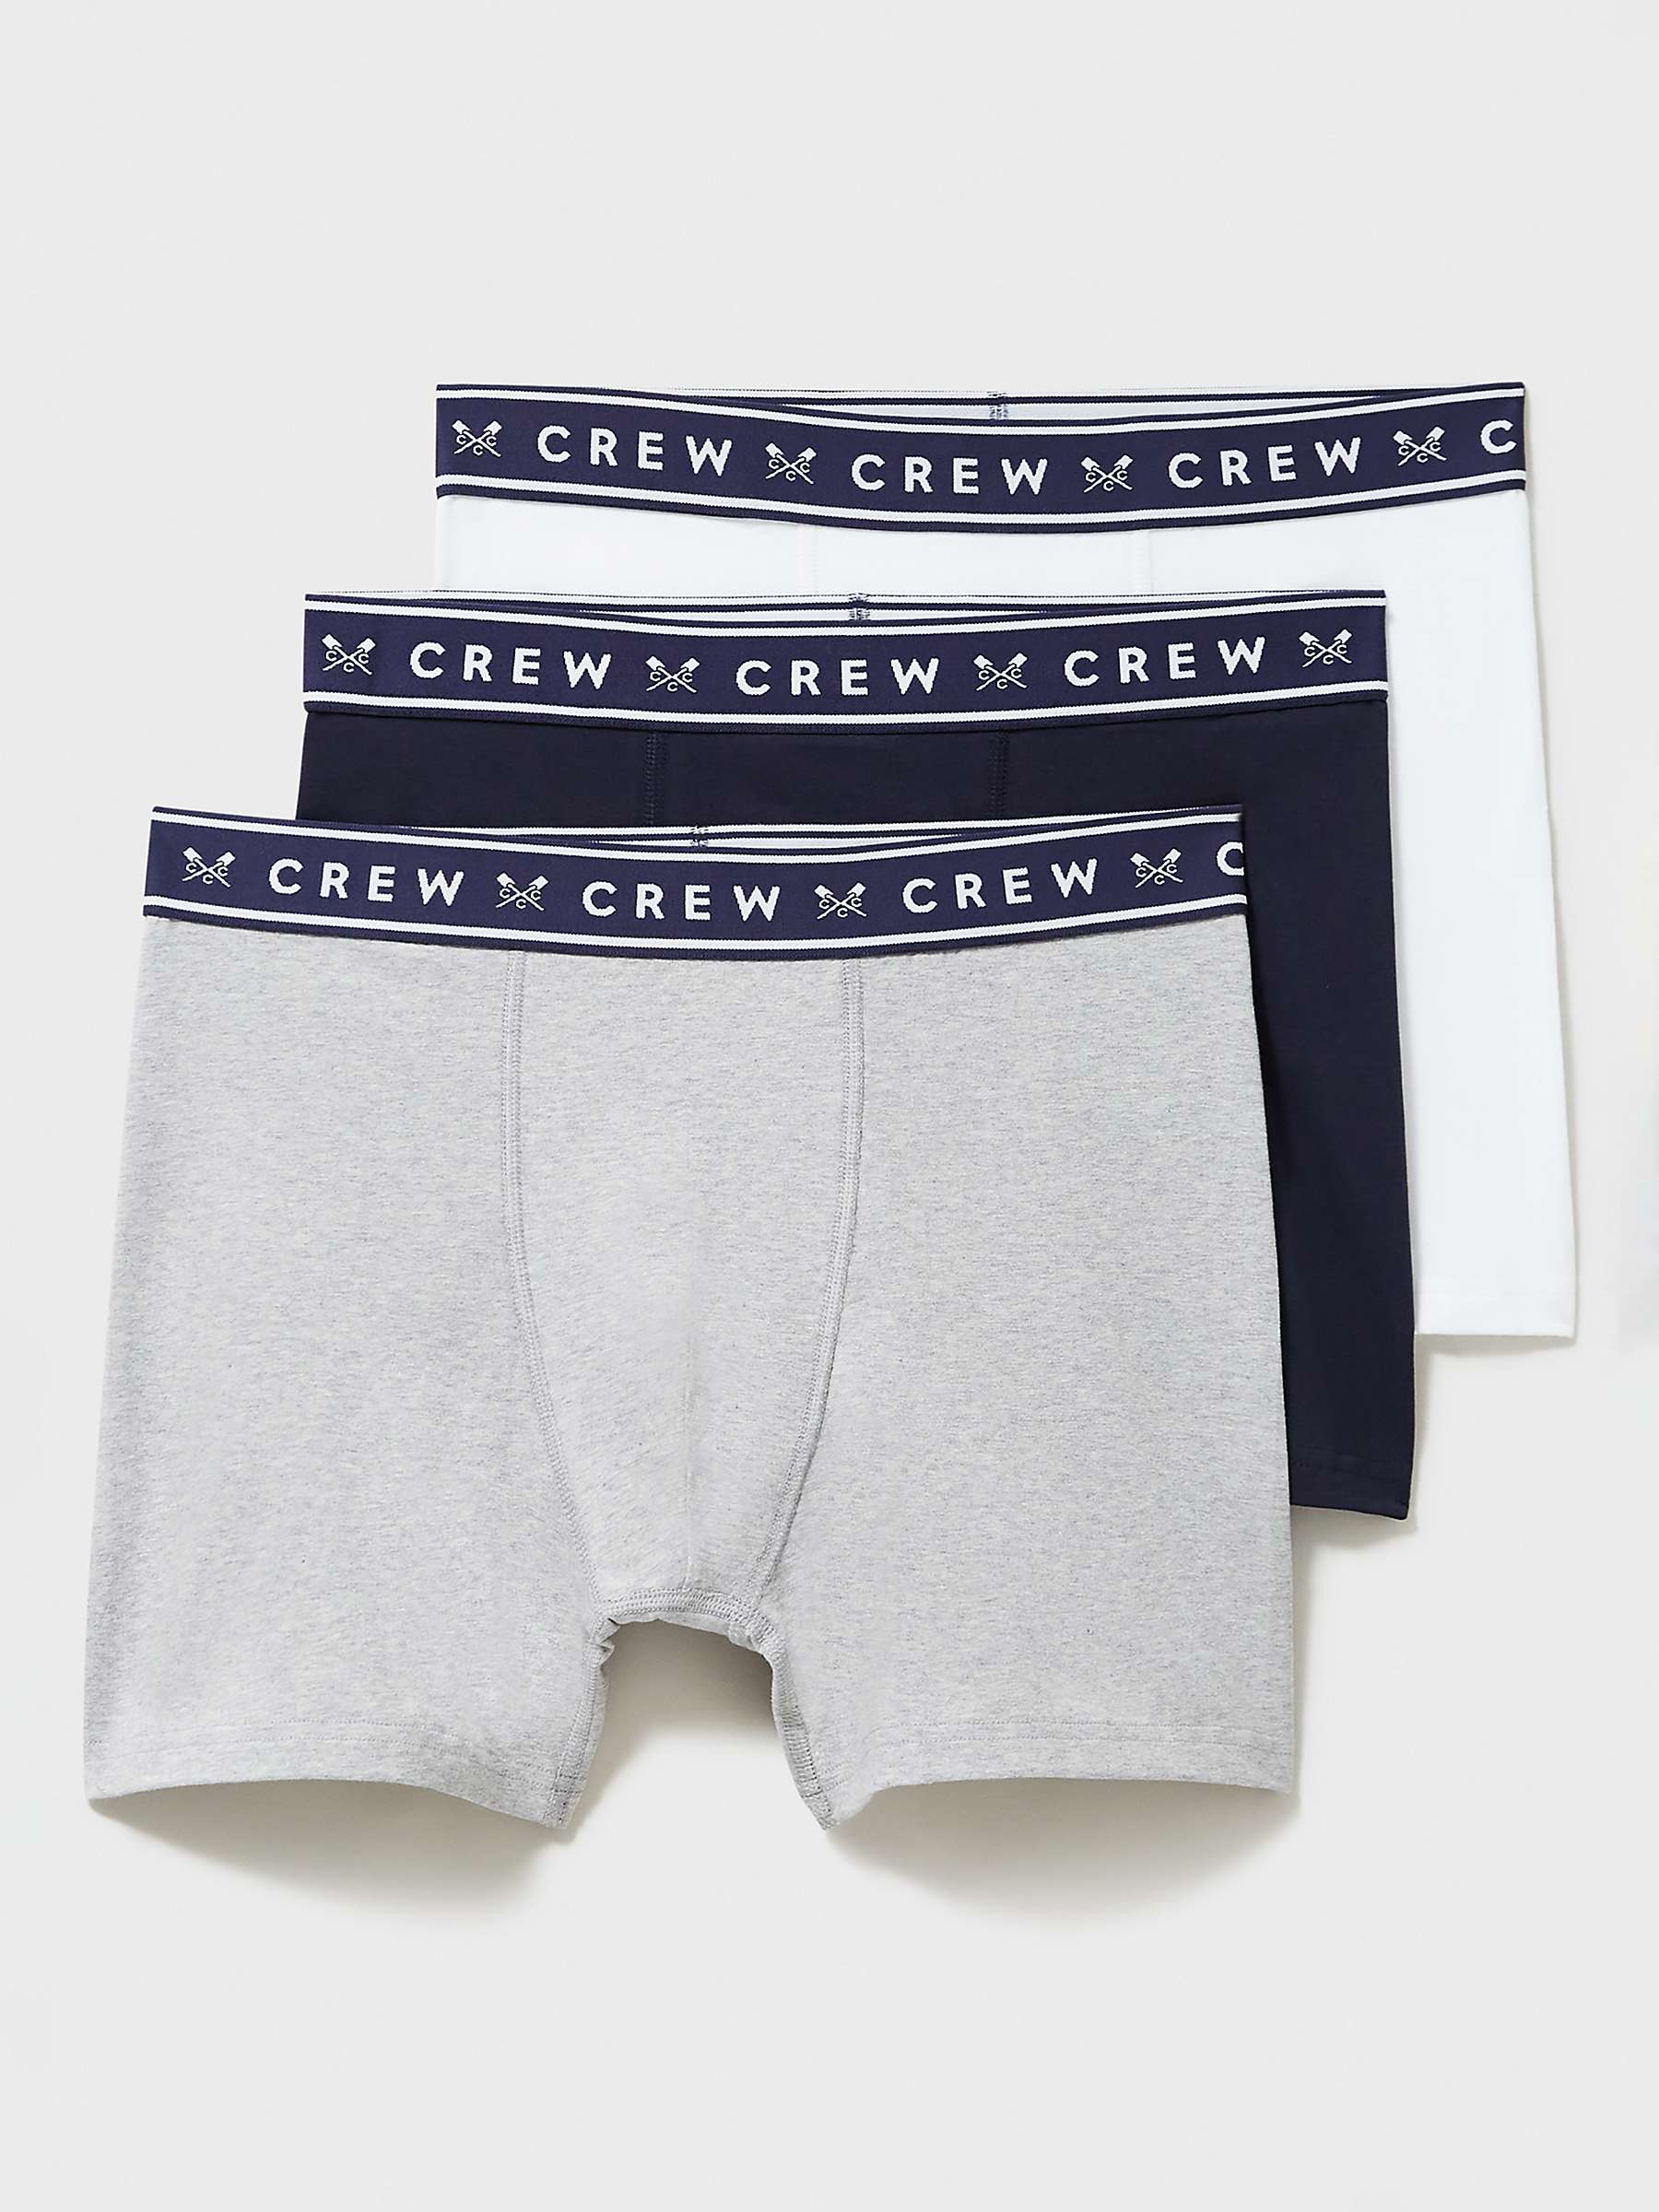 Buy Crew Clothing Jersey Boxers, Pack of 3 Online at johnlewis.com